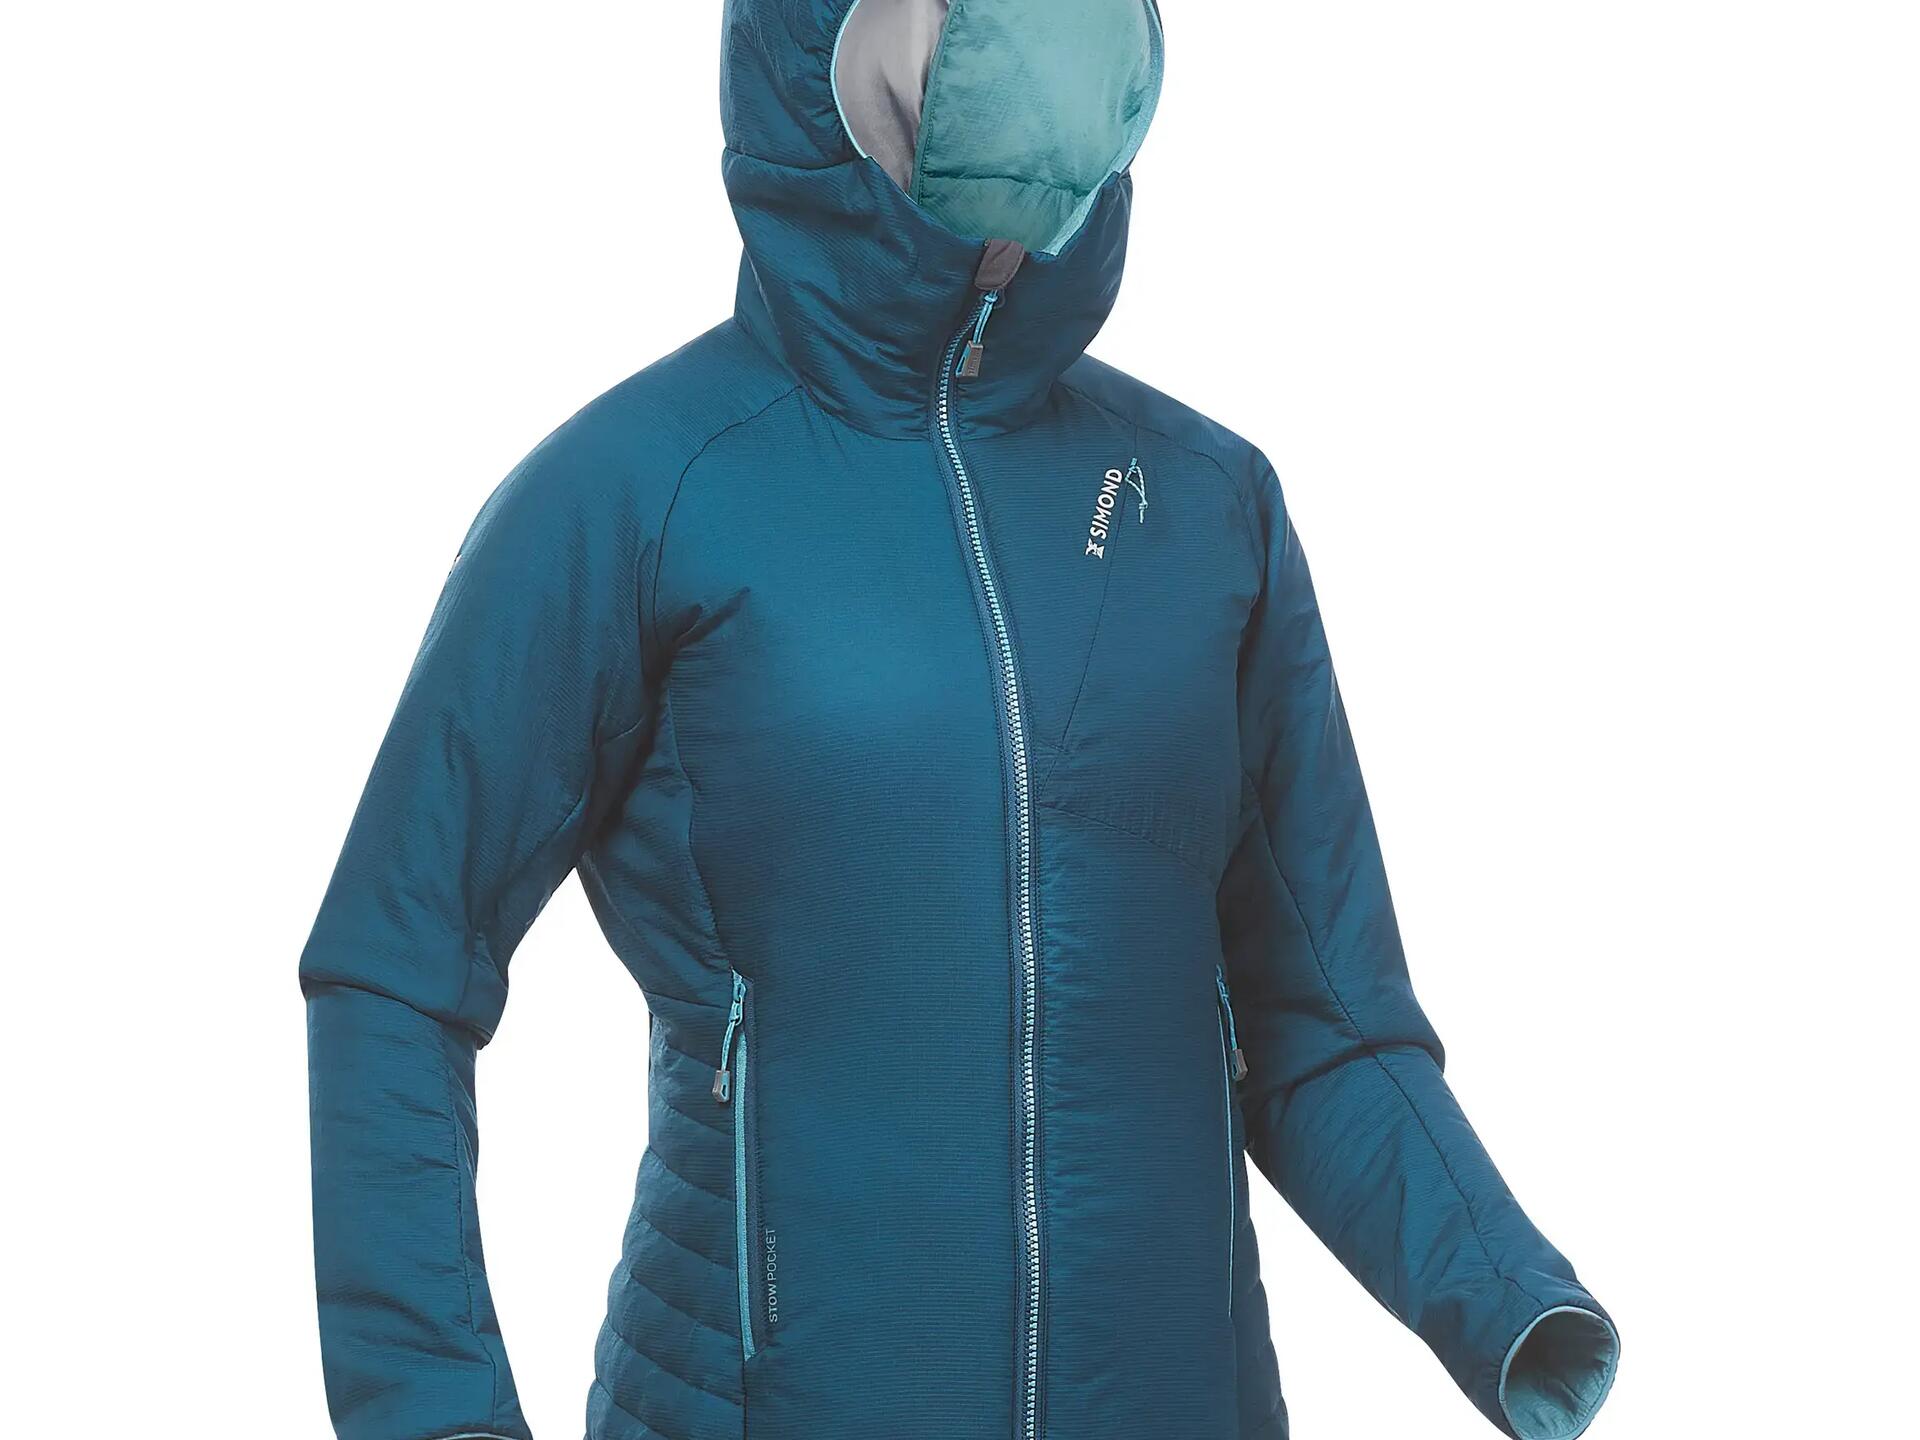 Performance pack - mixed-terrain mountaineering